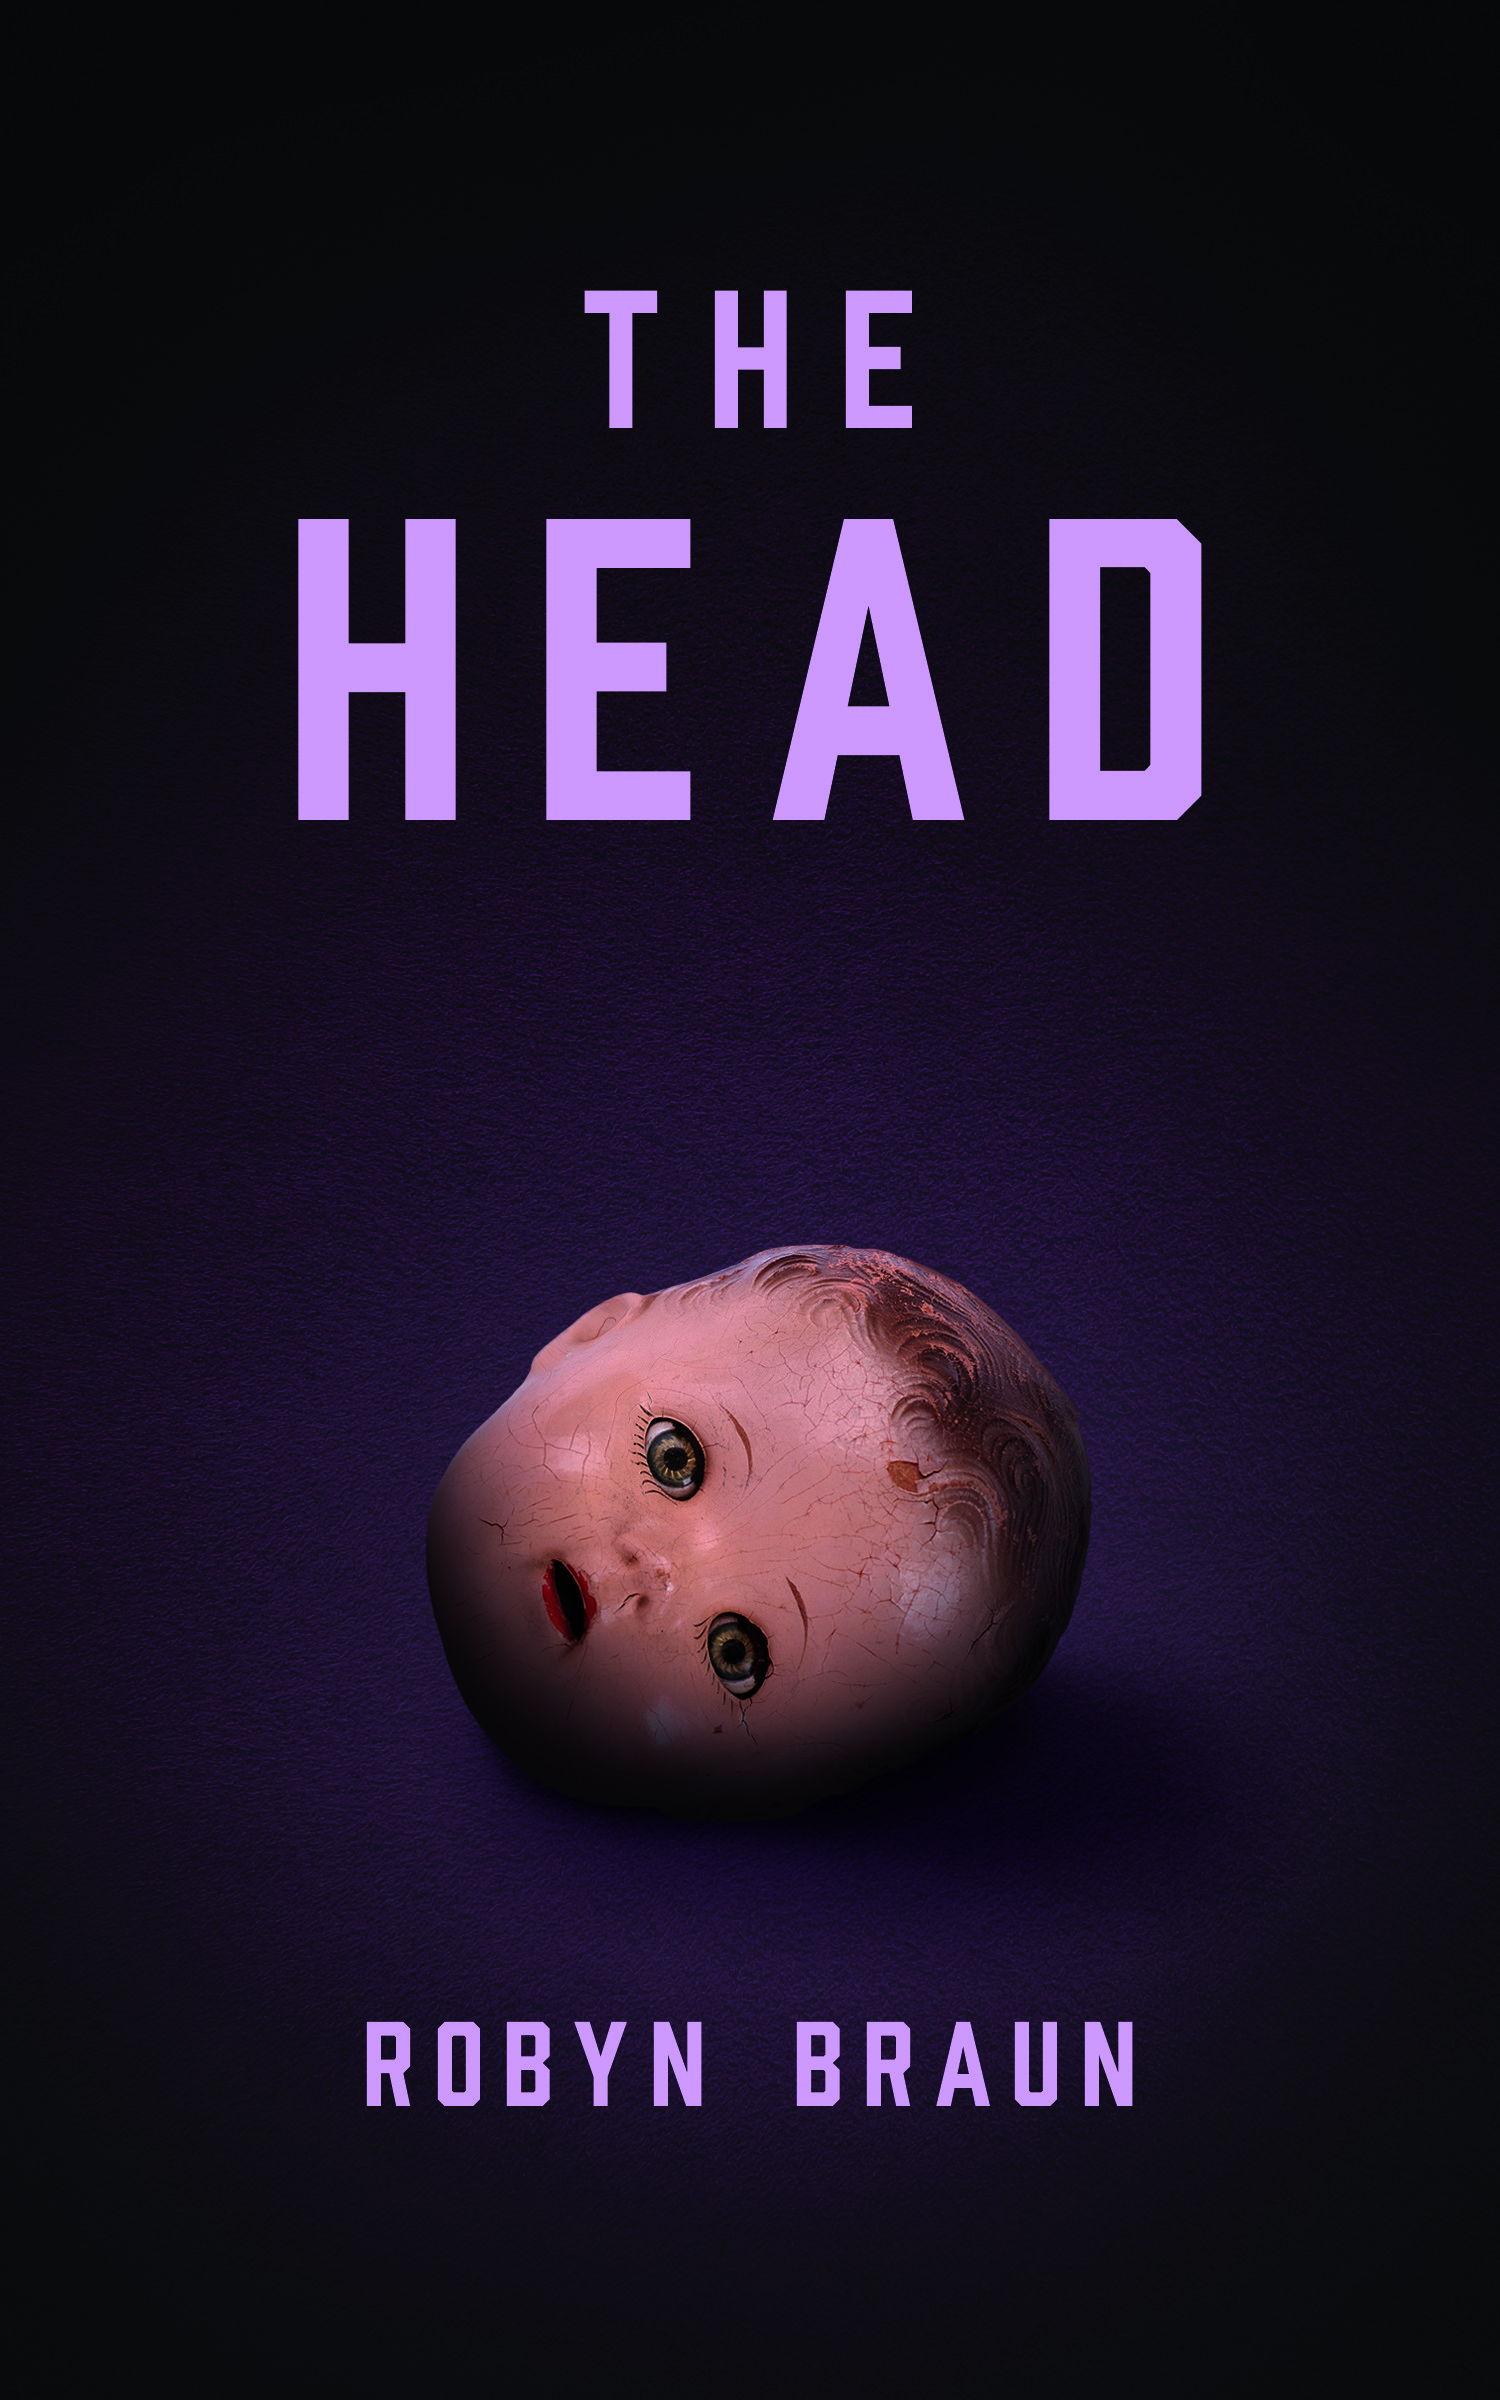 The cover of The Head by Robyn Braun.